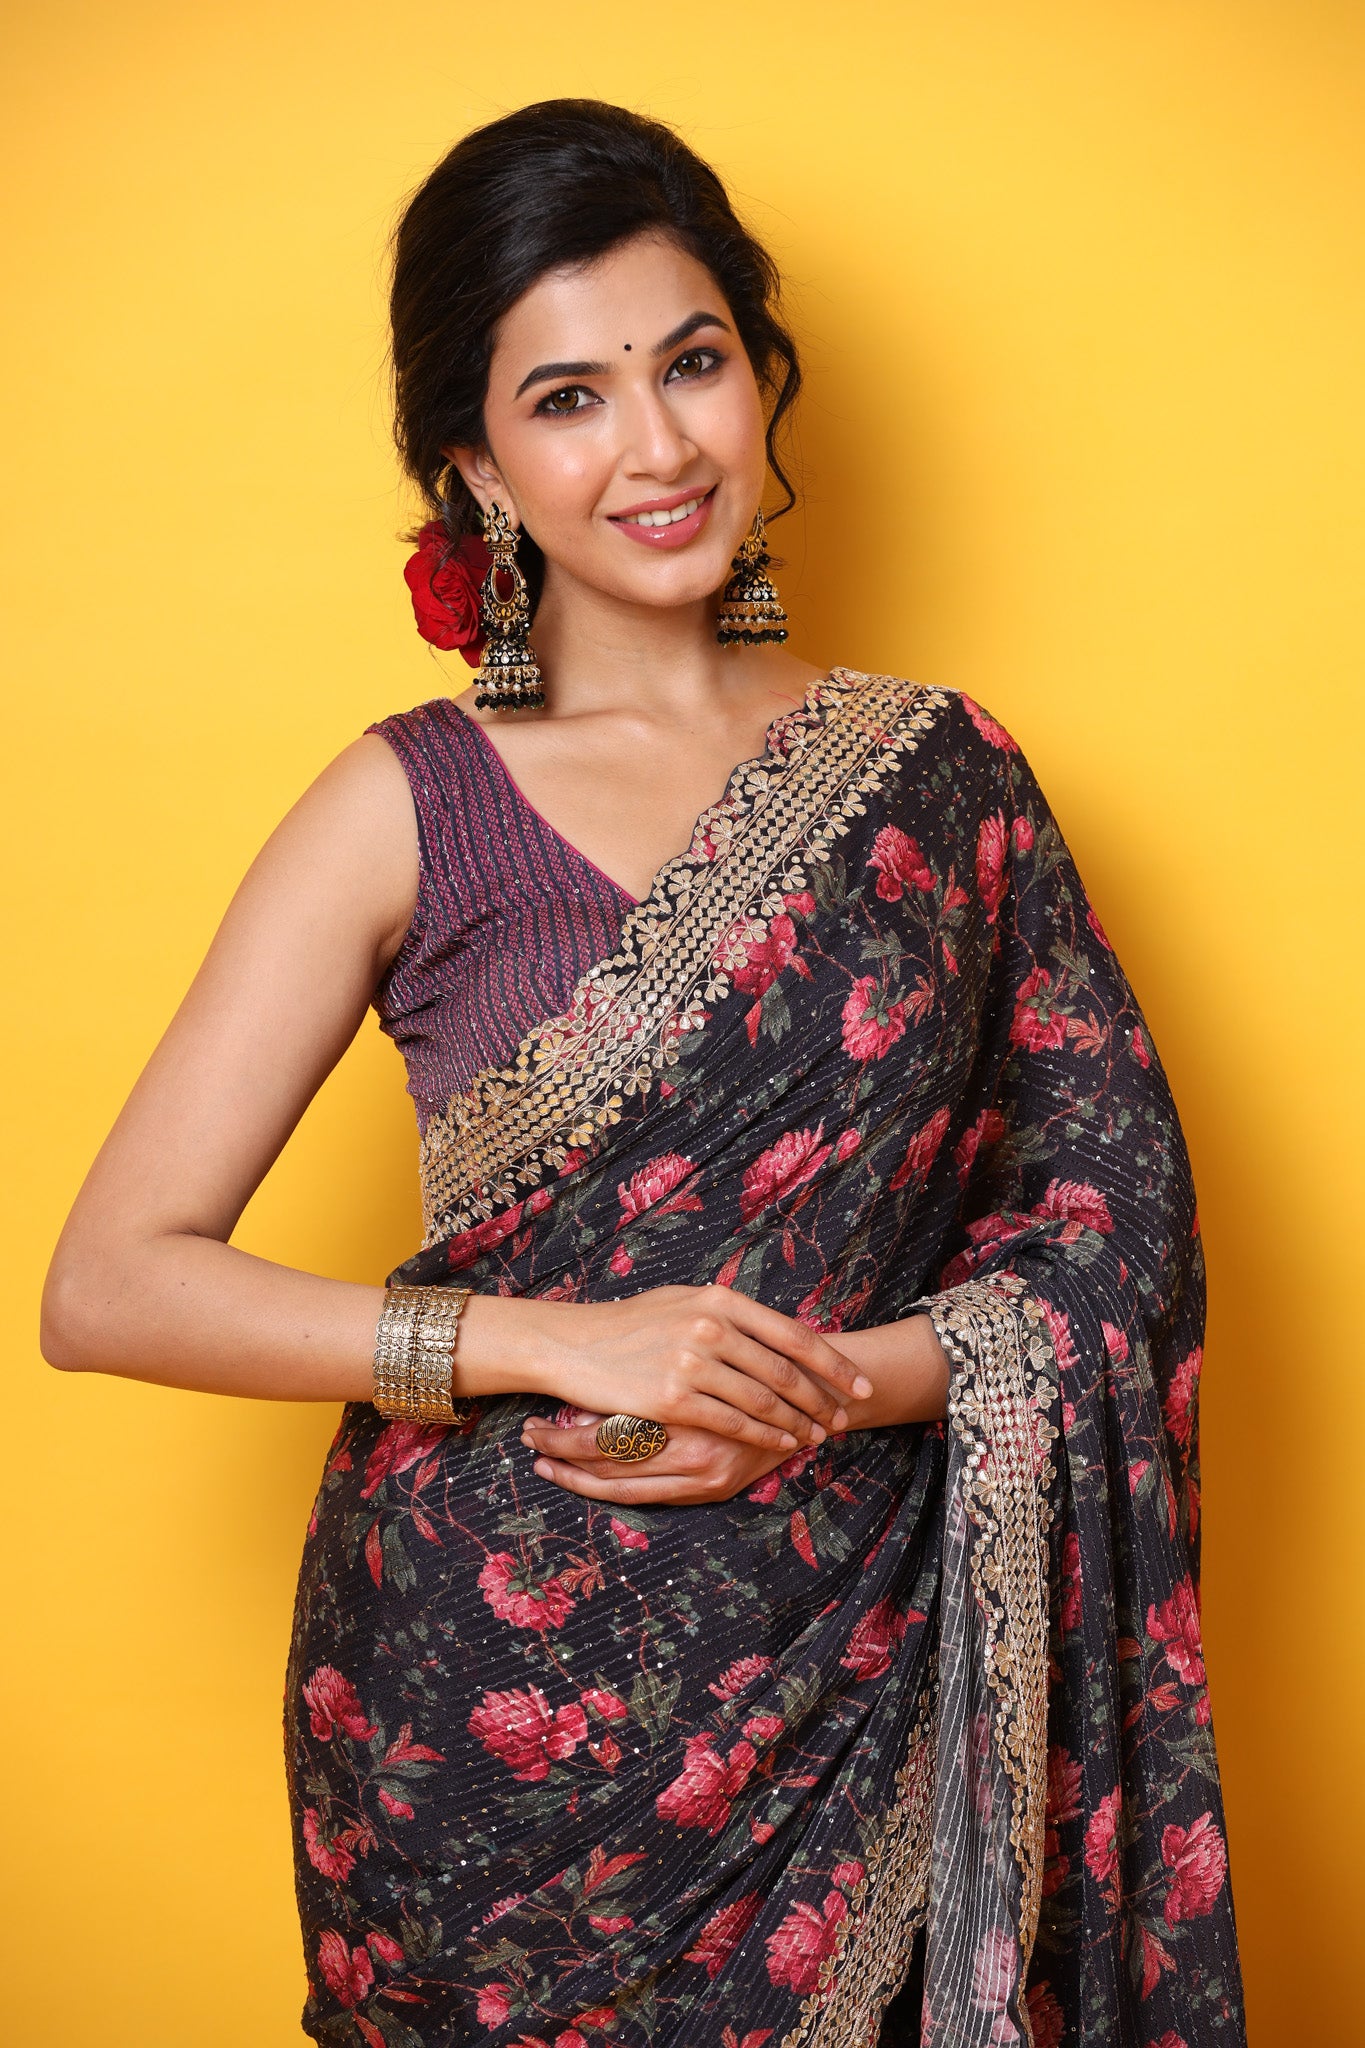 Buy black floral georgette saree online in USA with scalloped border. Make a fashion statement at weddings with stunning designer sarees, embroidered sarees with blouse, wedding sarees, handloom sarees from Pure Elegance Indian fashion store in USA.-closeup